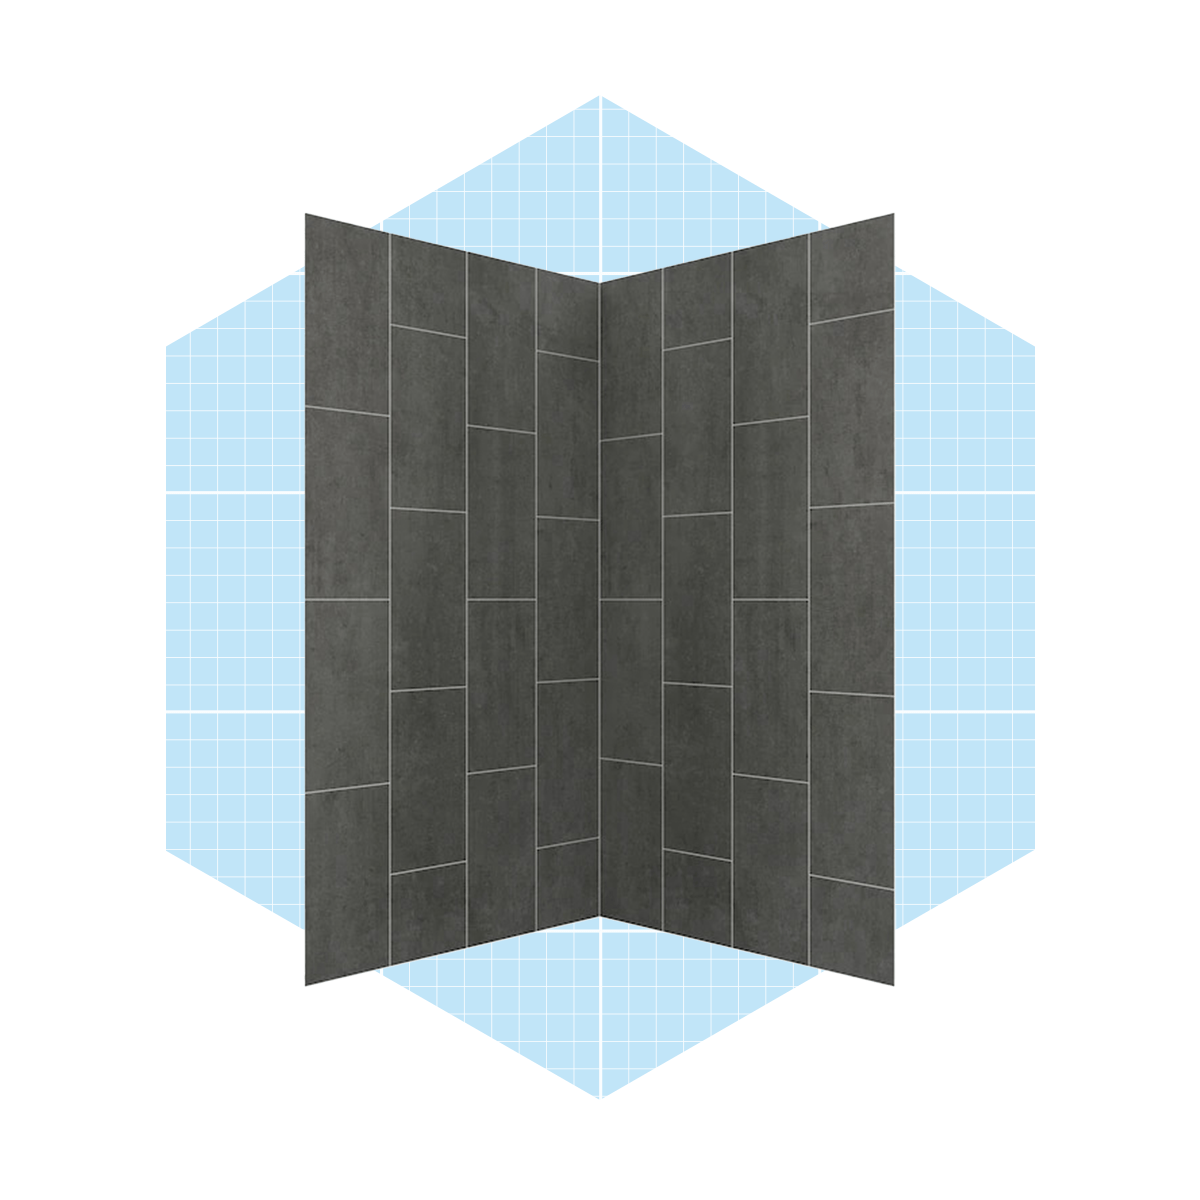 Foremost Foremost Shower Wall In Slate Ecomm Via Lowes.com